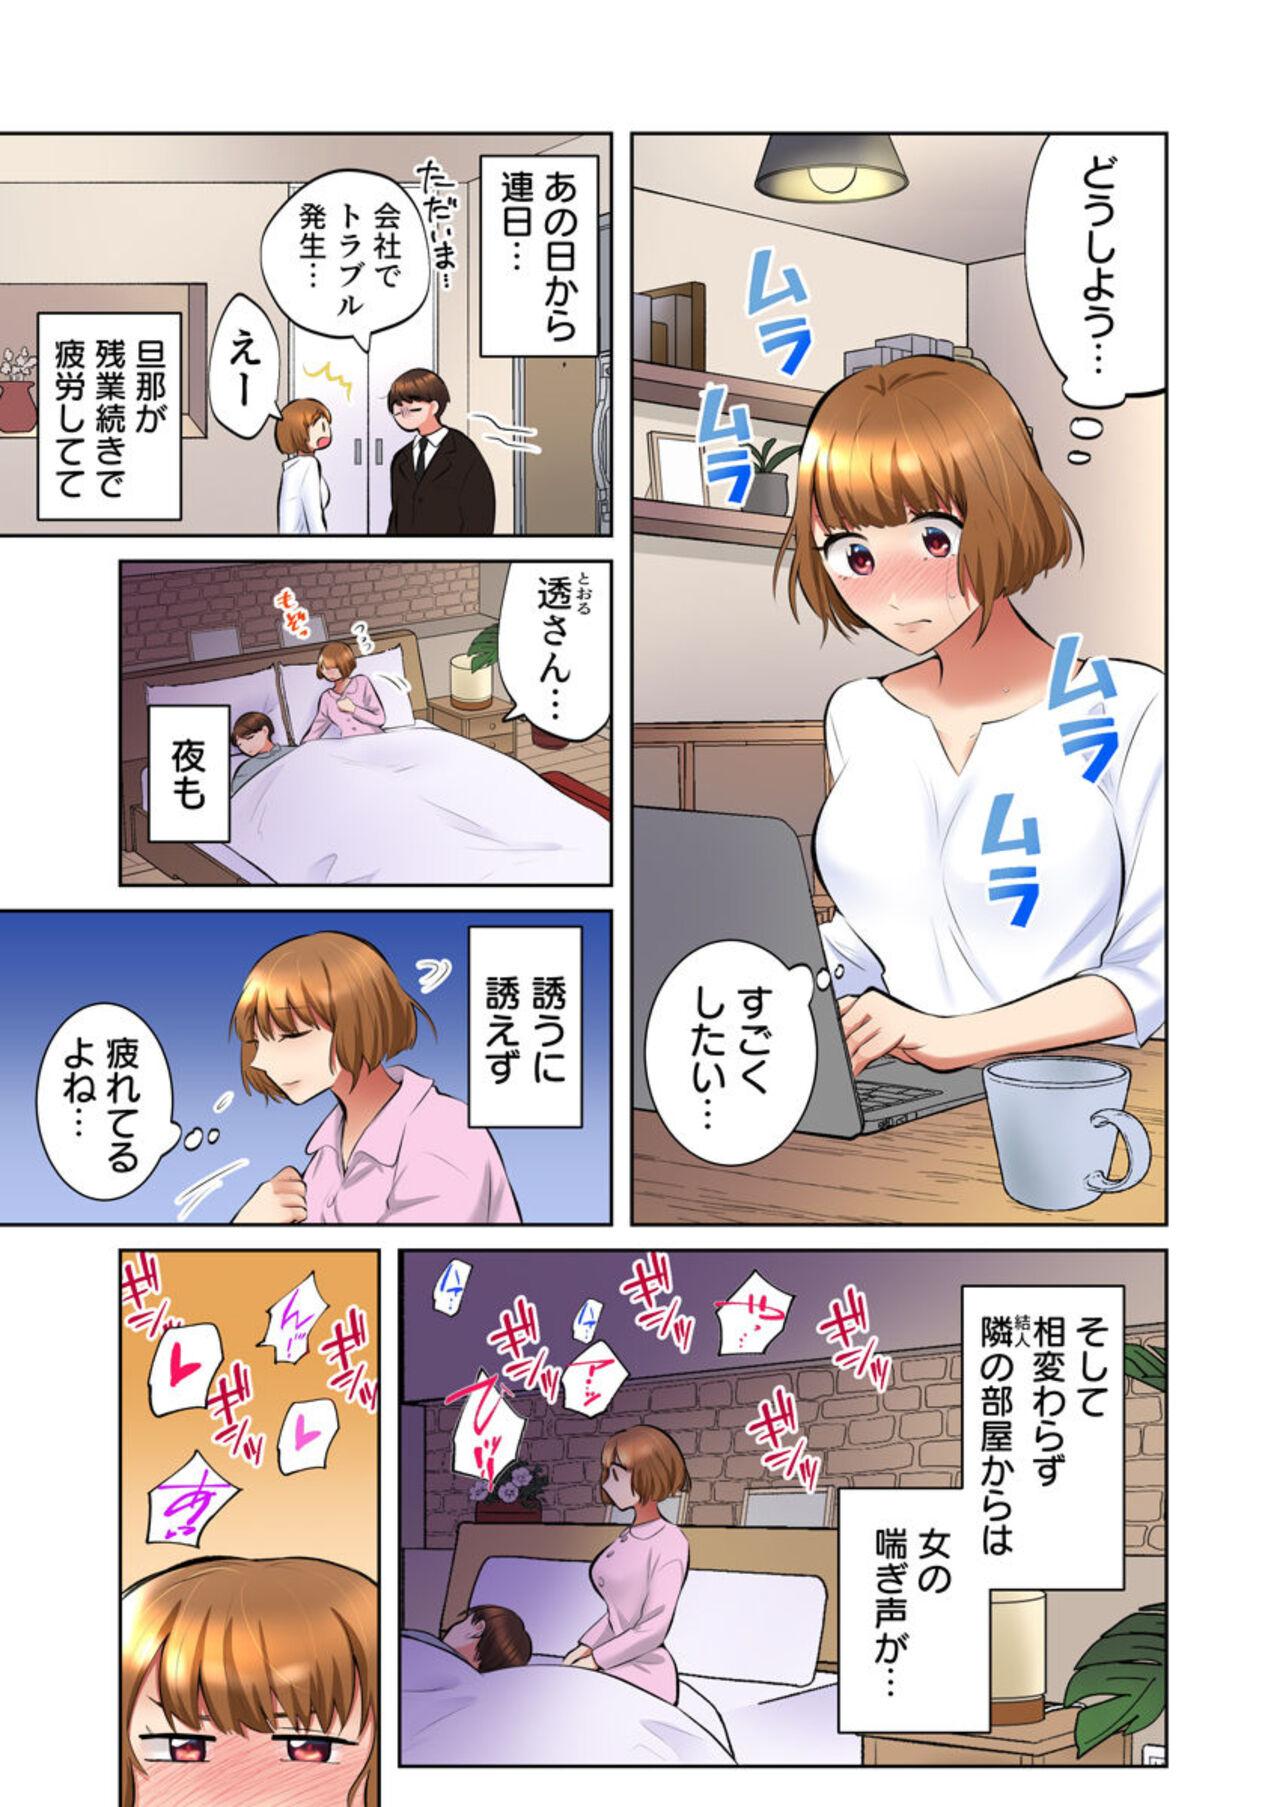 [Ika Hotaru] My Neighbor Is A Sadistic Ex-Boyfriend ~I Love My Husband, But My Aching Body Has Been Redeveloped~ (Full Color) 2 9